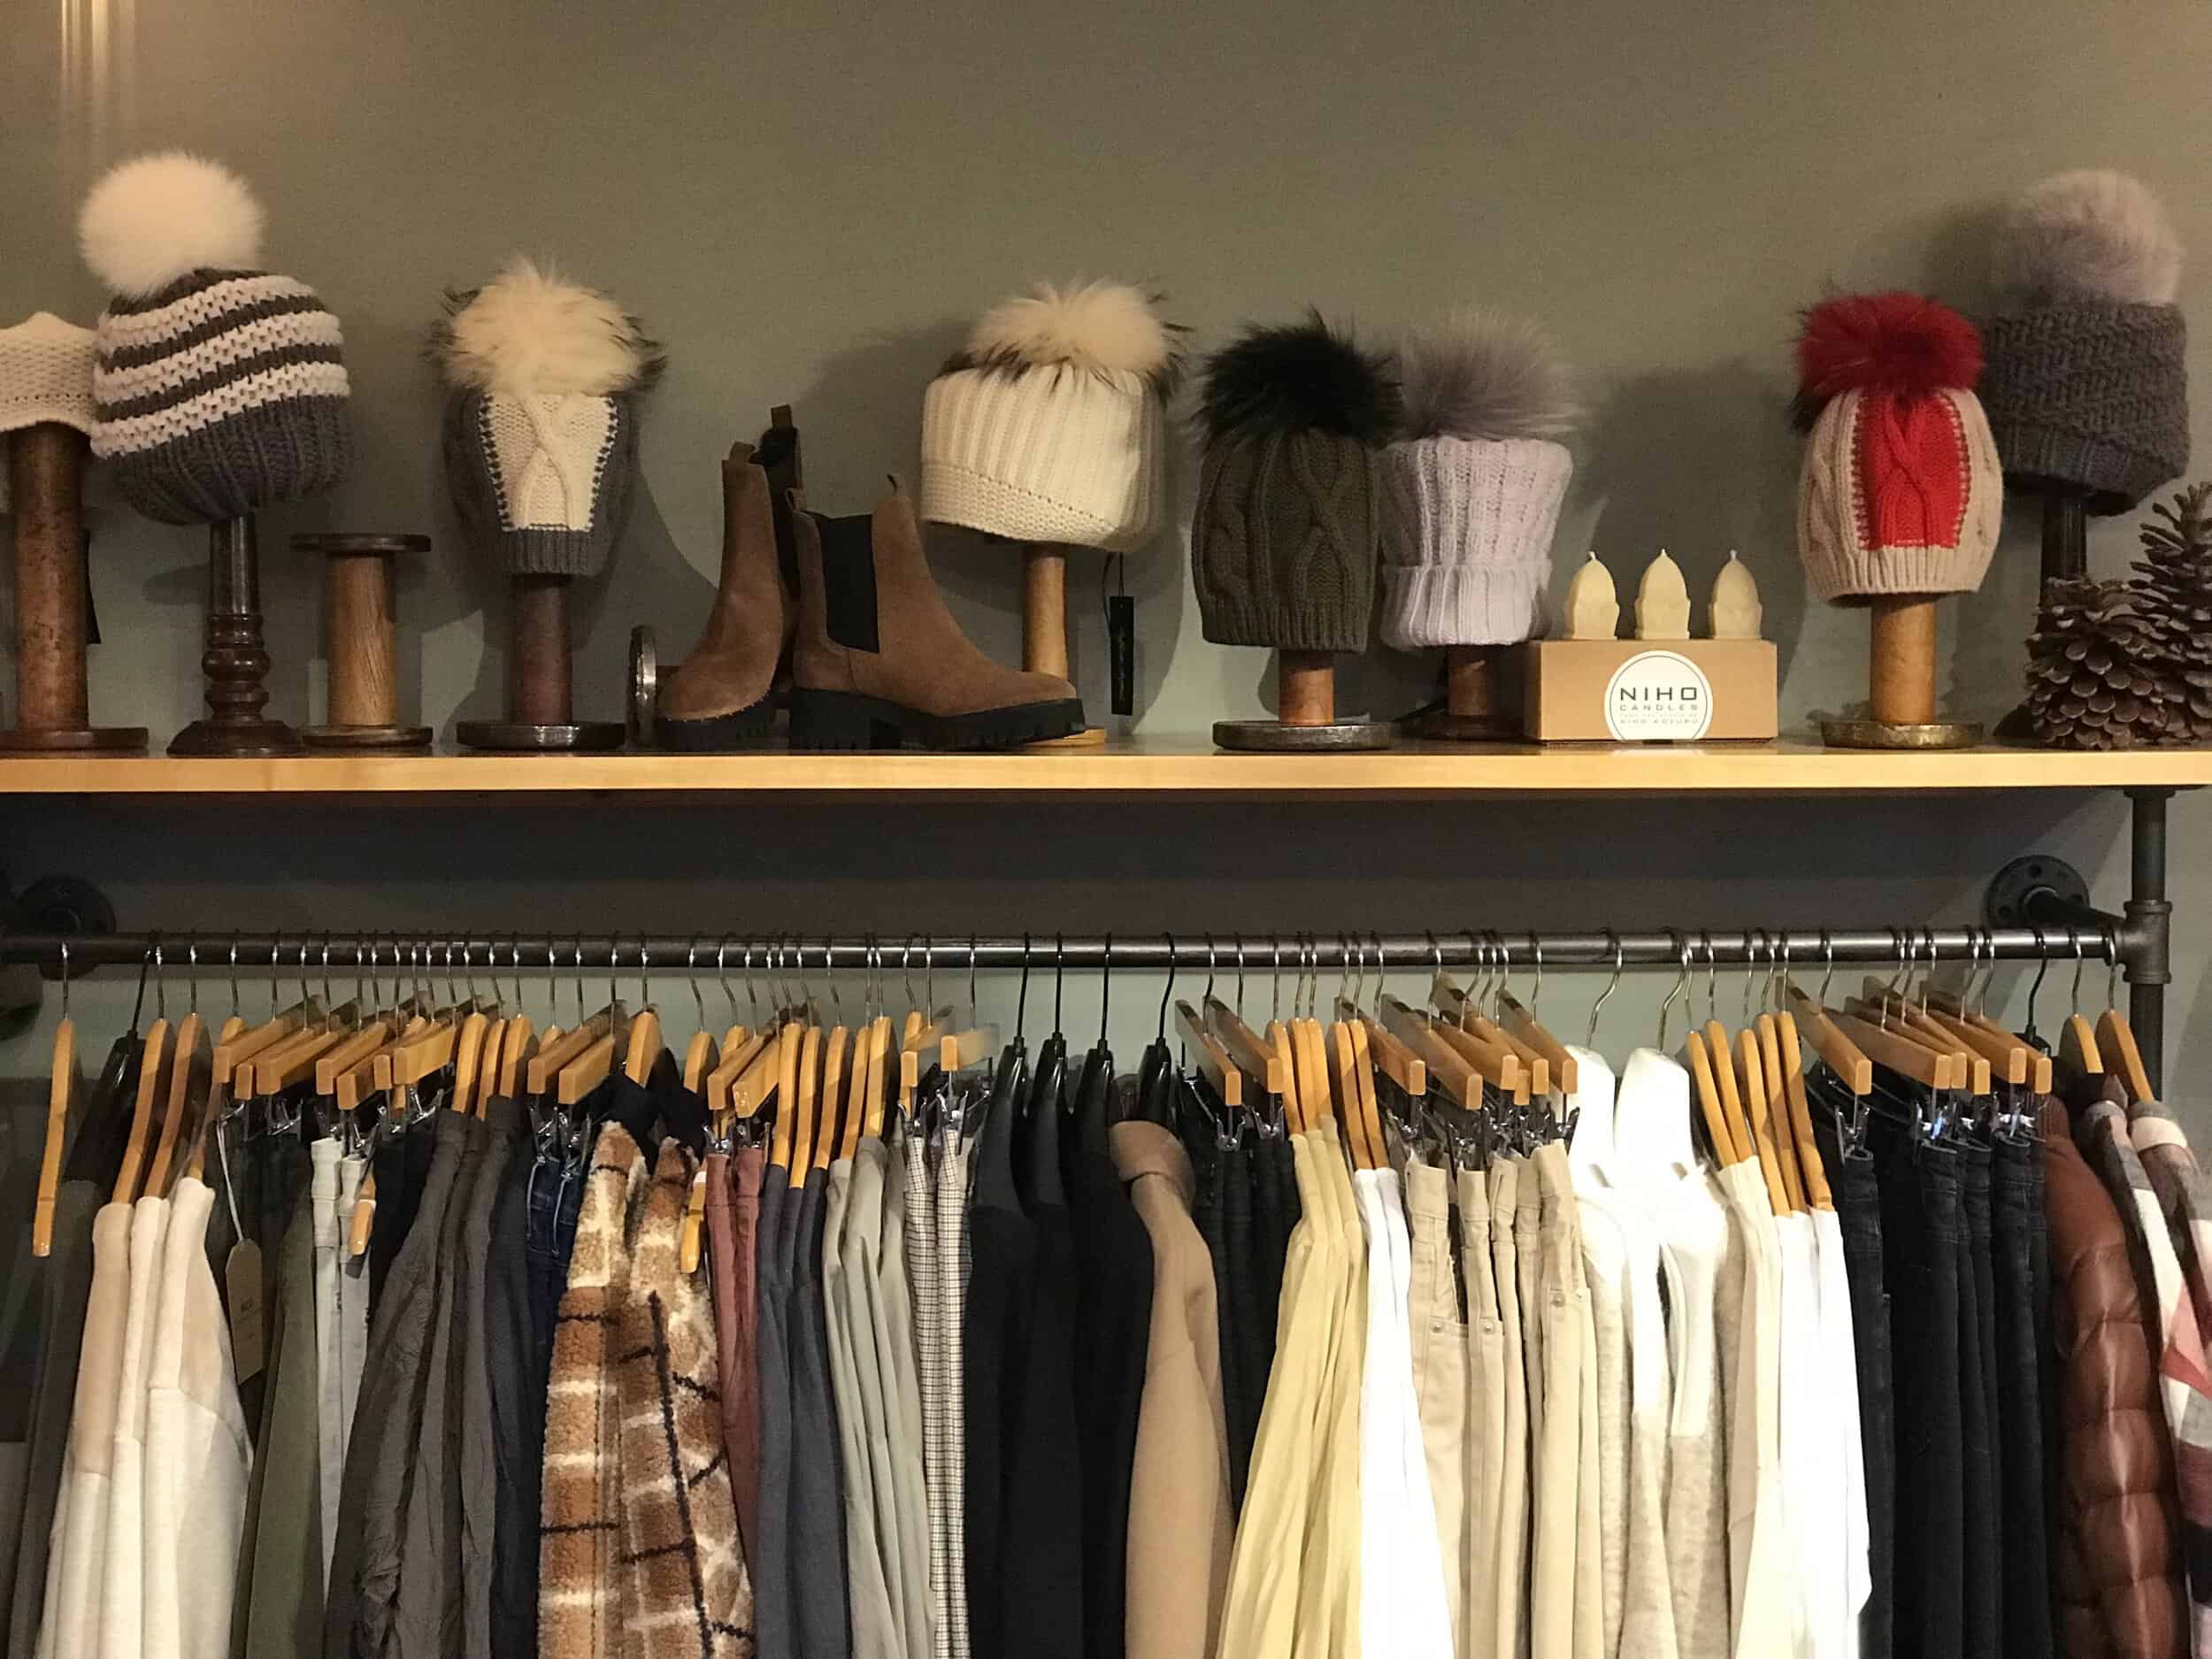 4orty Bridge Boutique - Hats, Shoes, and Sweaters